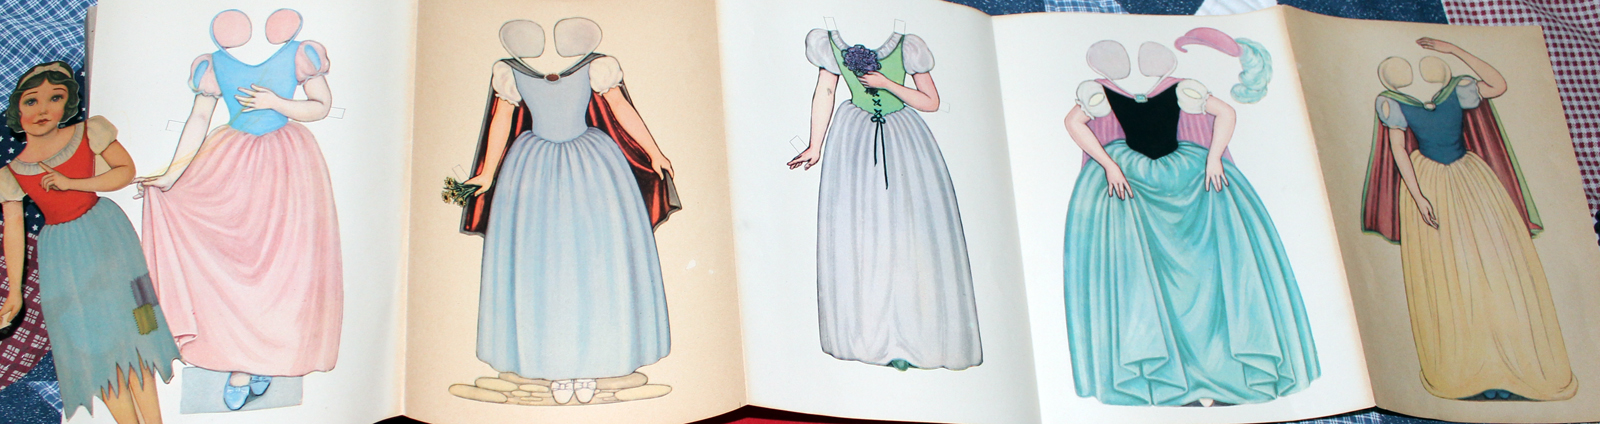 Filmic Light - Snow White Archive: 1938 Snow White Cut-Out Dolls ...